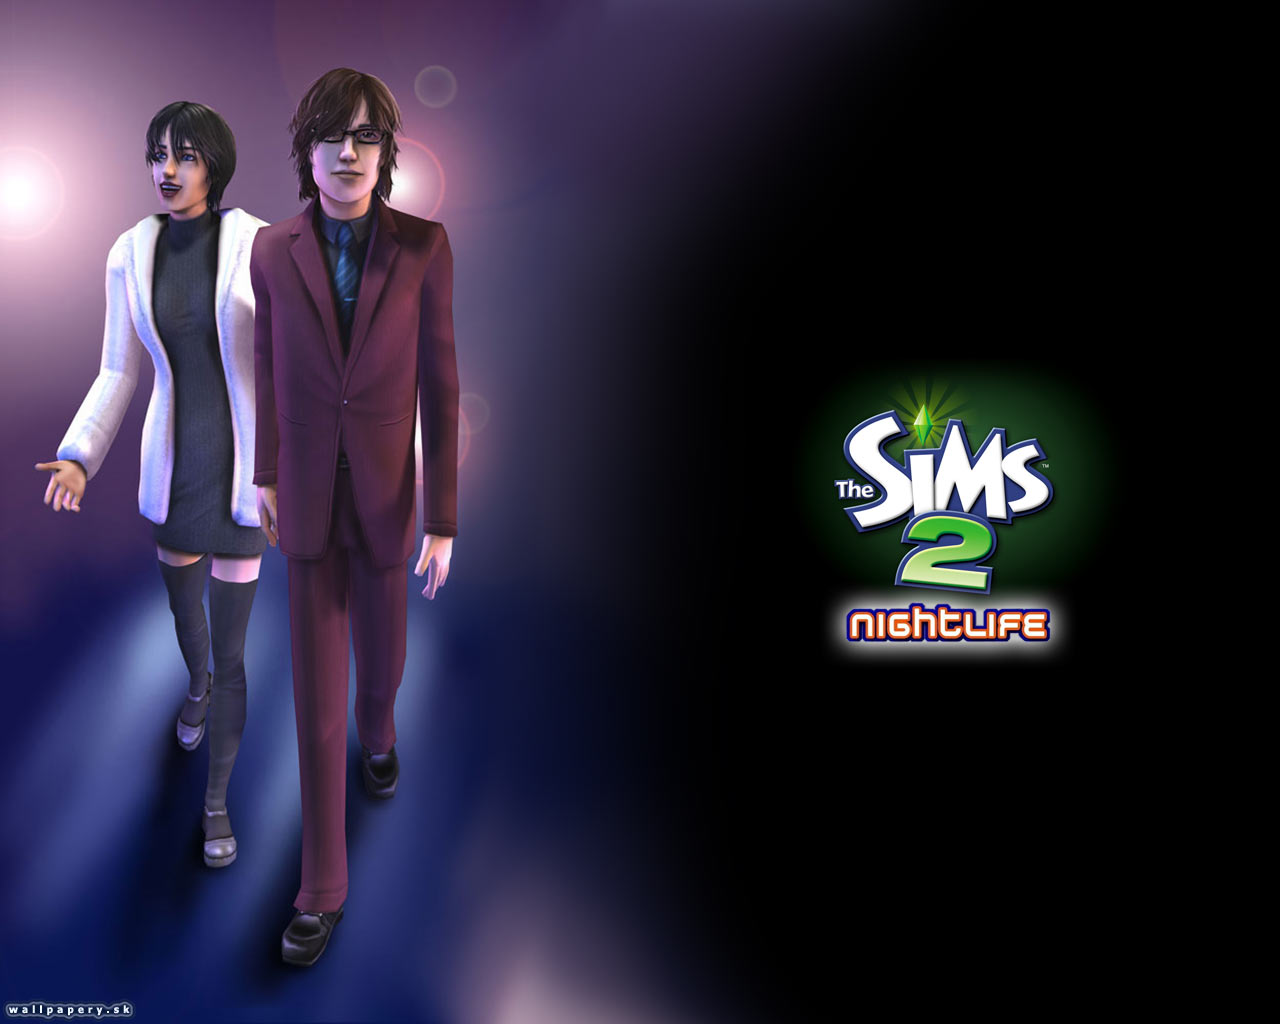 The Sims 2: Nightlife - wallpaper 2